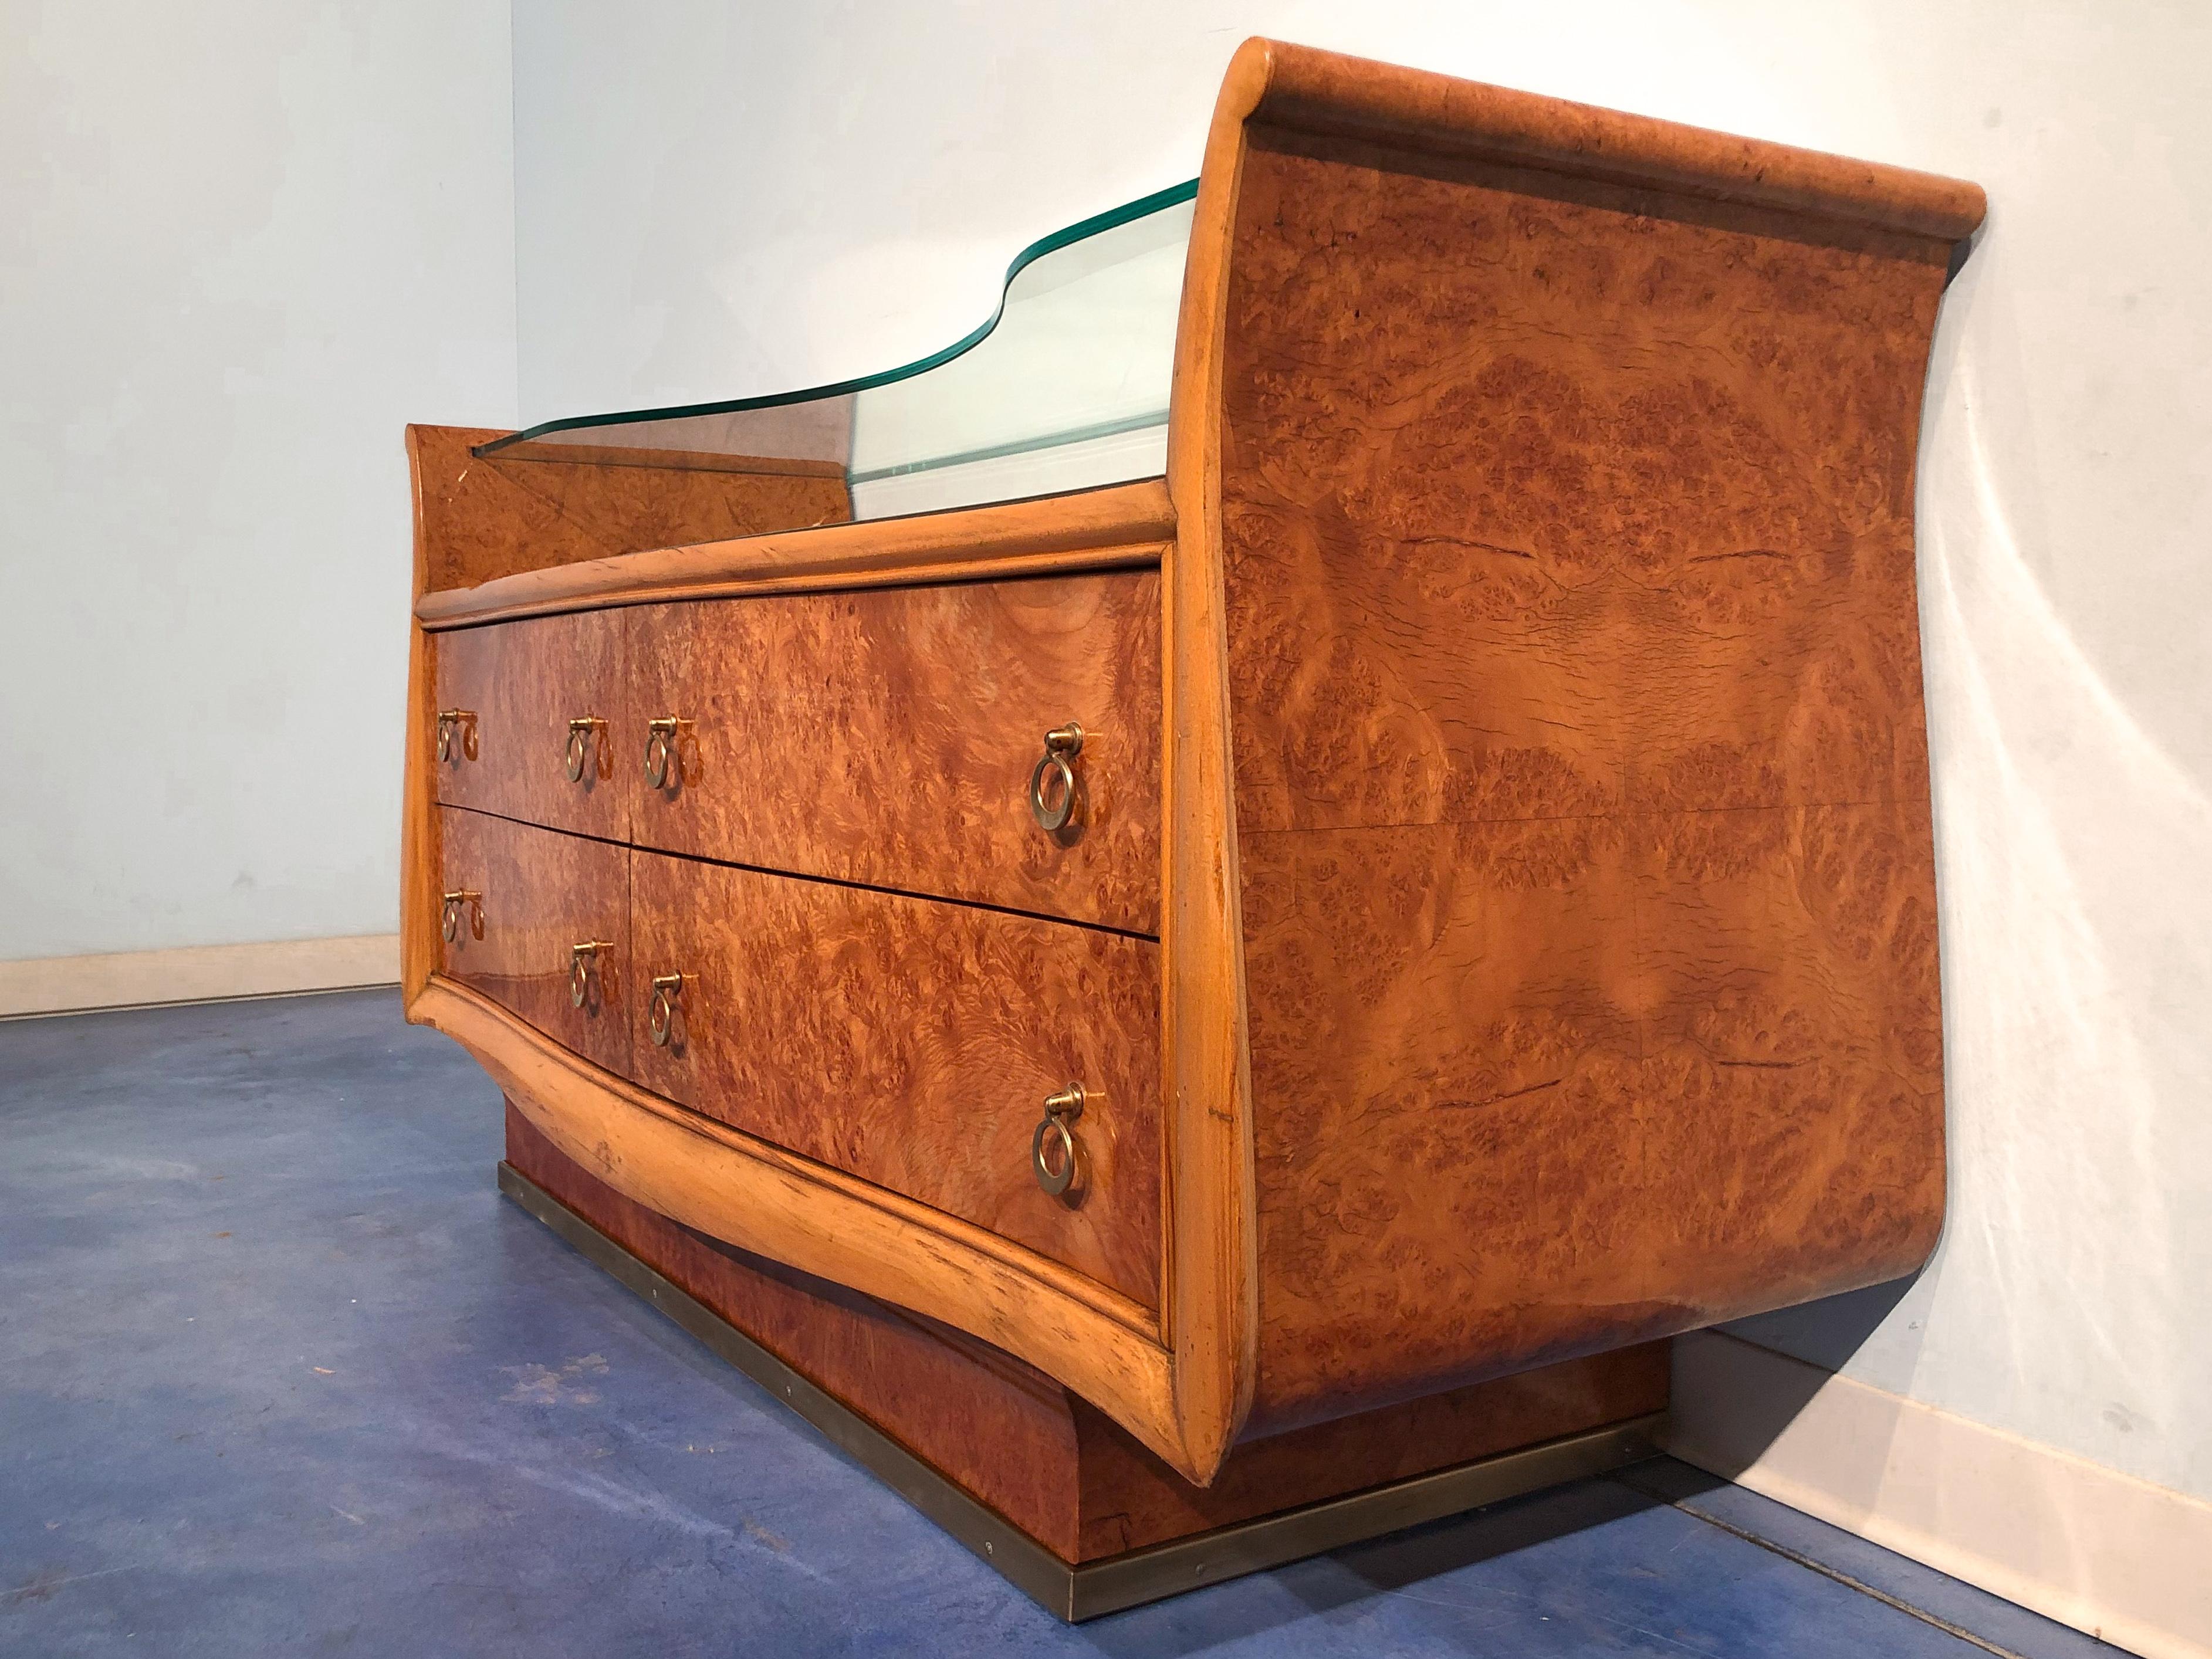 Italian Mid-Century Modern Chest of Drawers in Birch Briar Root, 1950s For Sale 12